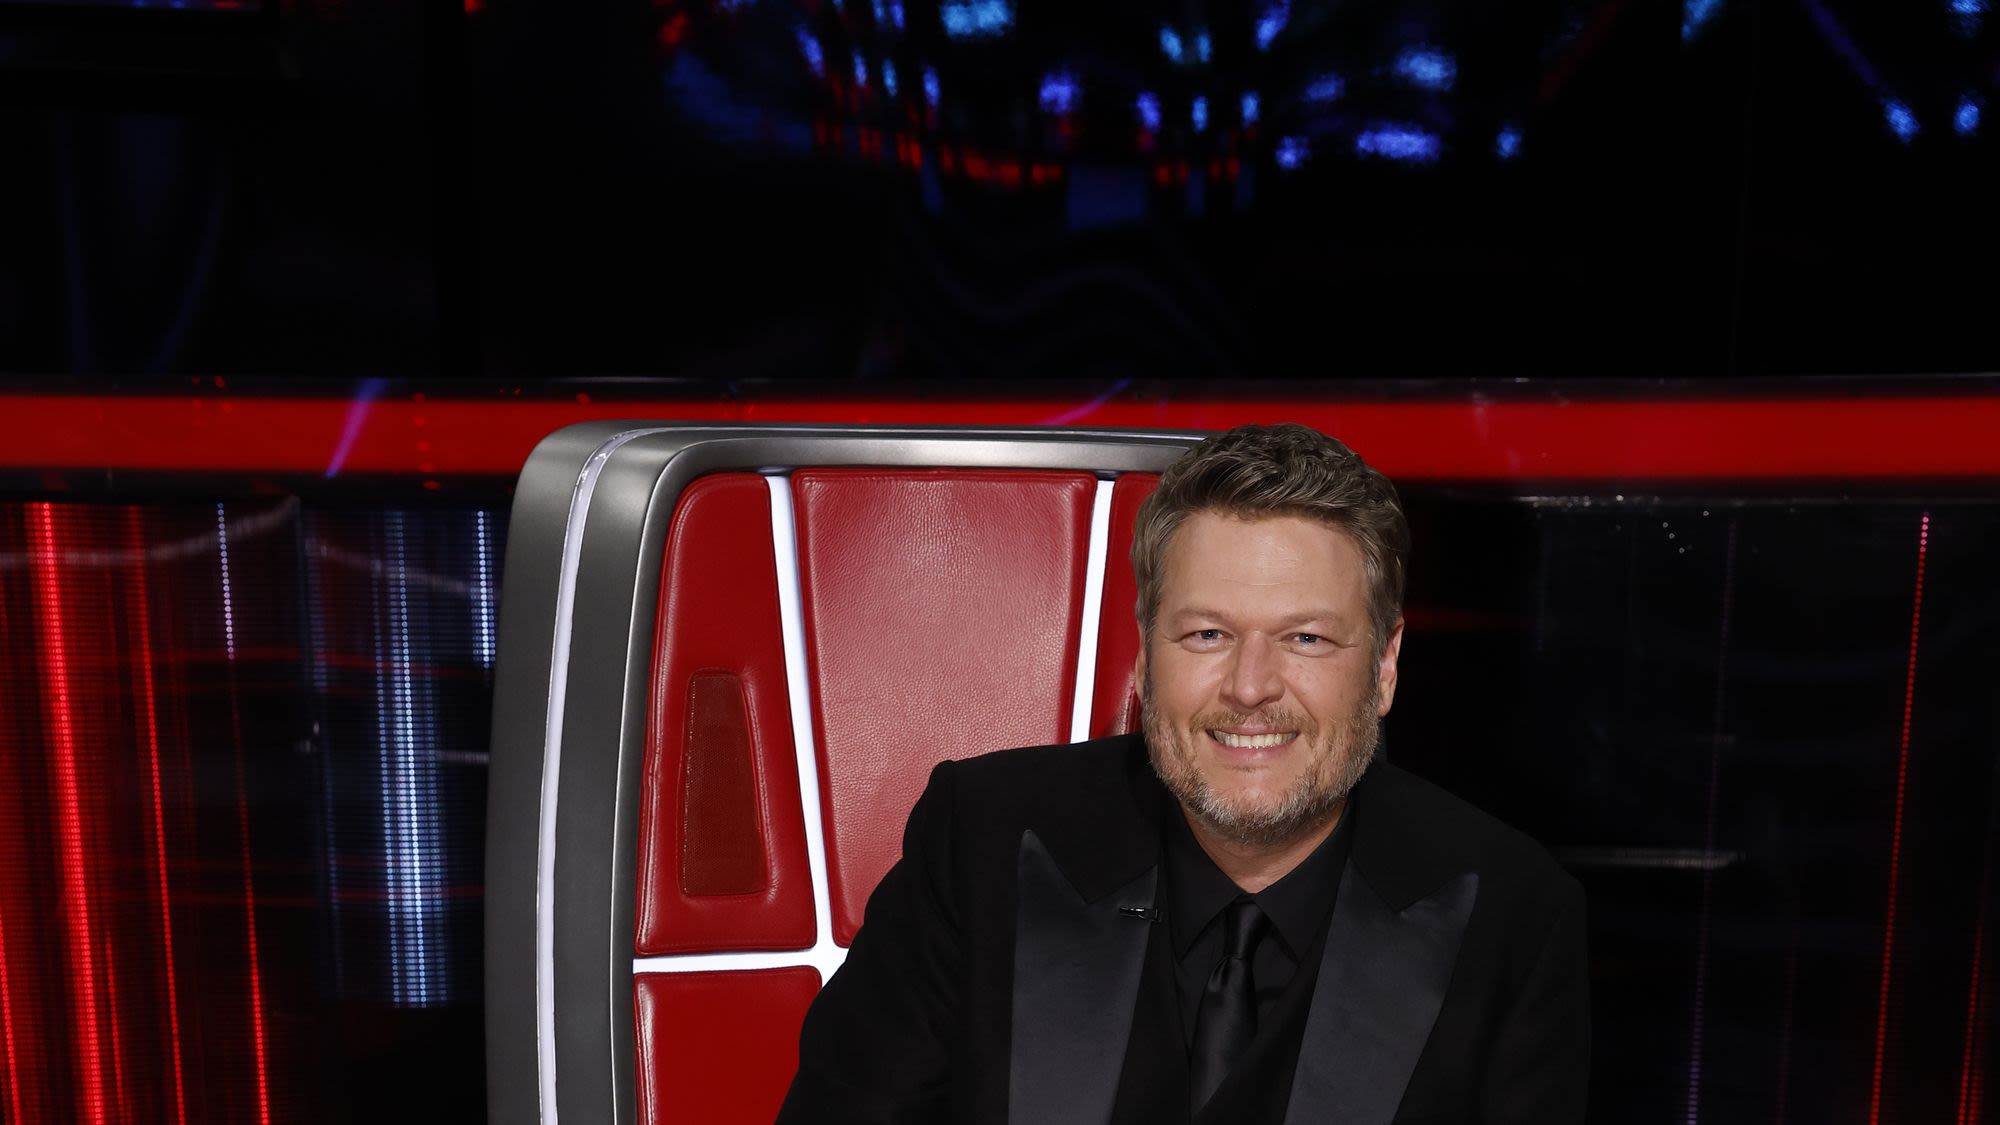 Blake Shelton Said He Would Return to 'The Voice' Under One Circumstance